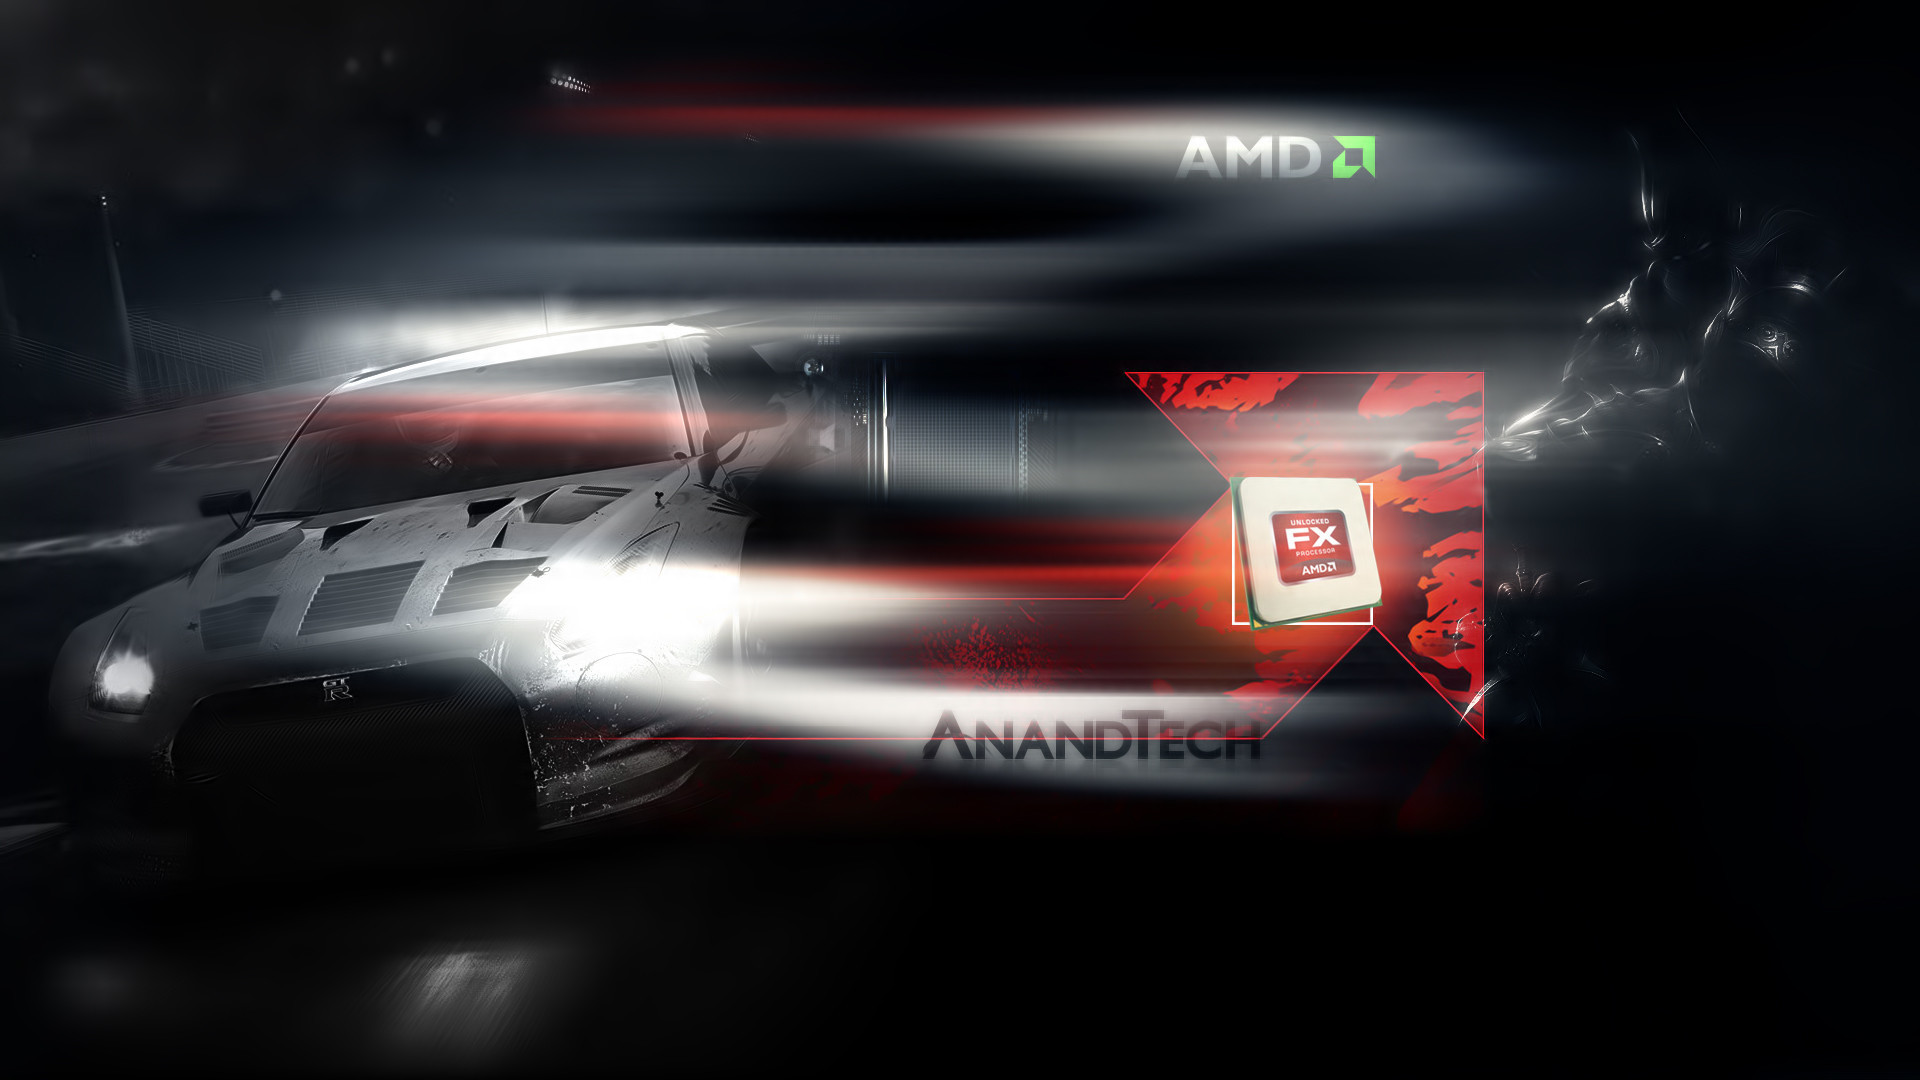 1920x1080 AMD-Radeon-Wallpapers-PIC-WPHR18085